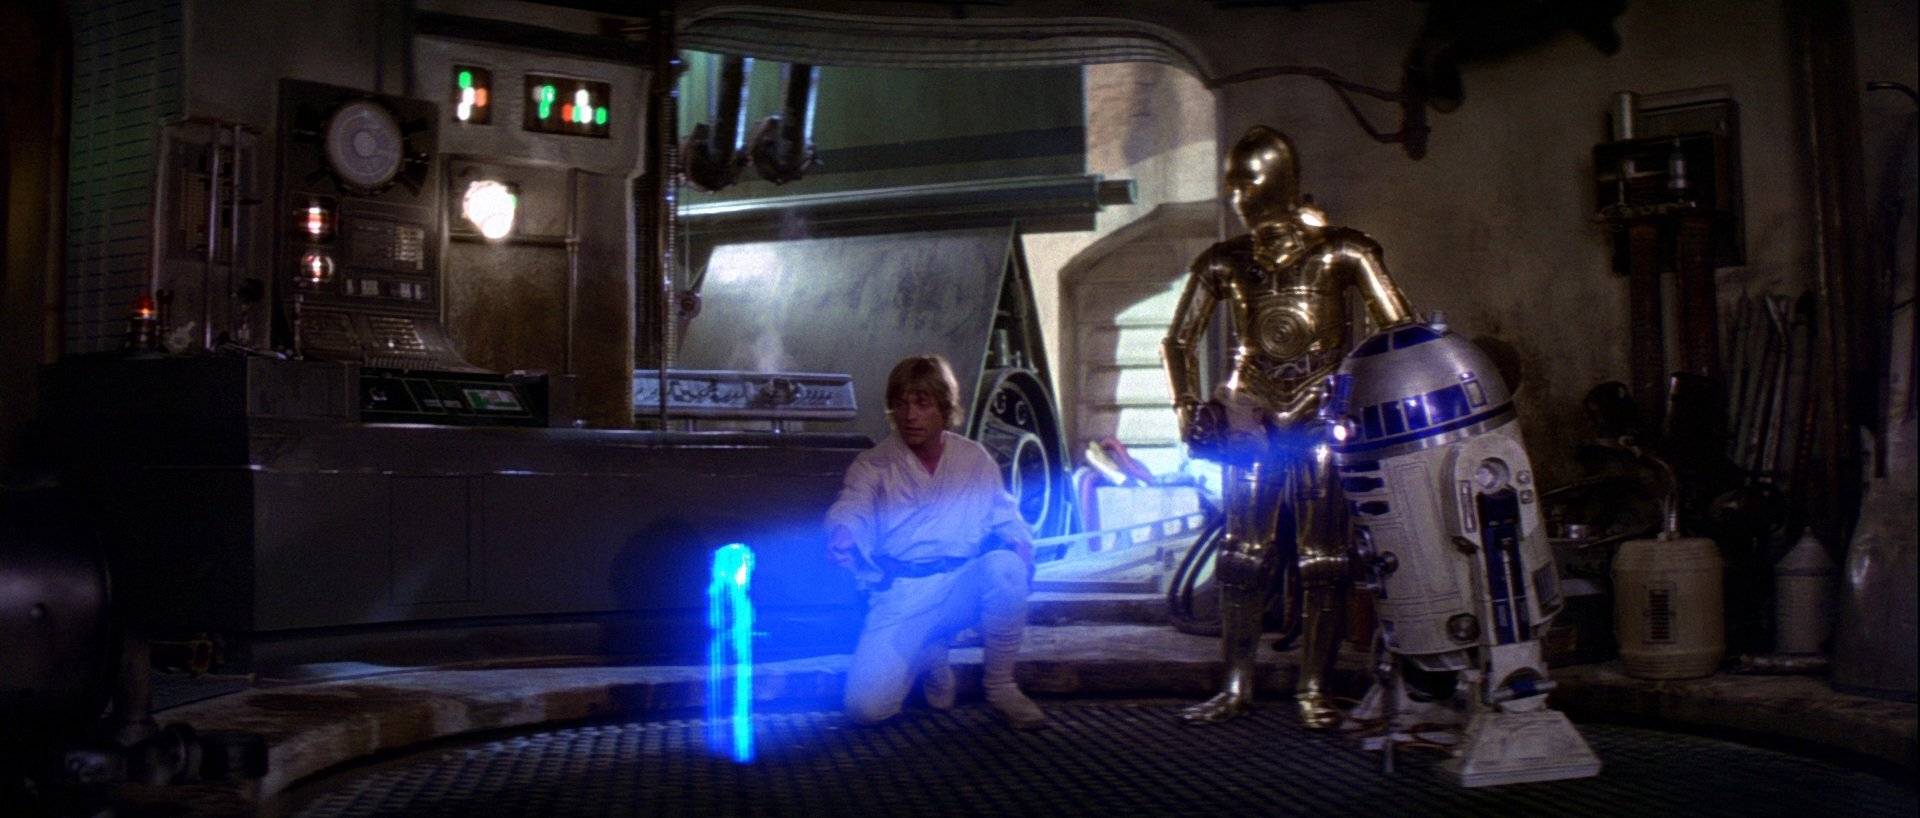 Star Wars 4: A New Hope (1977)